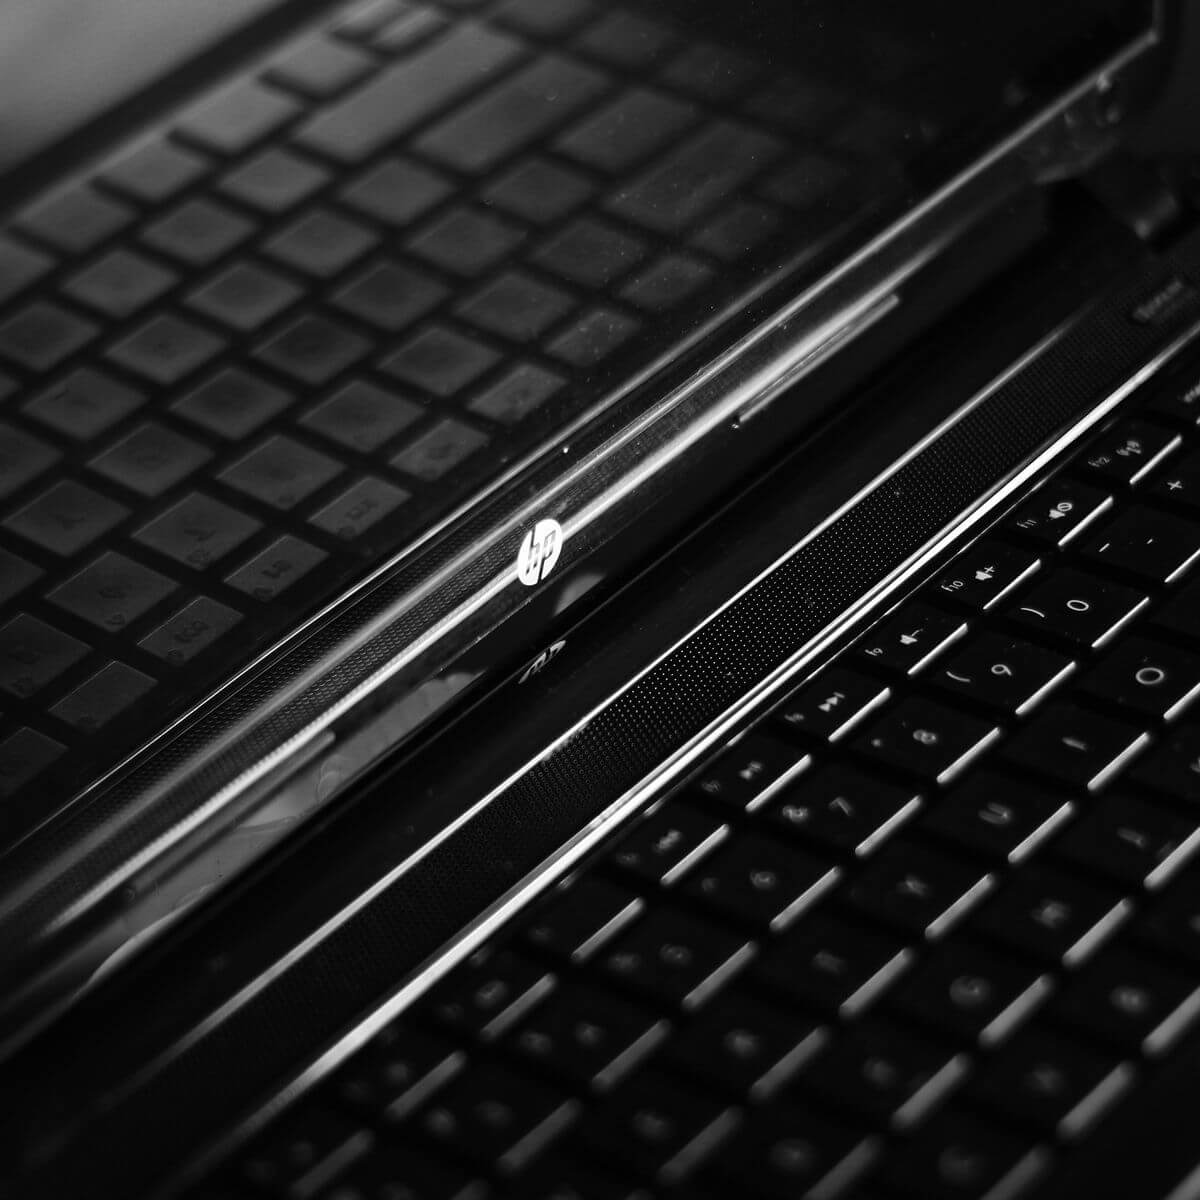 Laptop close-up - Windows has encountered a problem communicating with a device